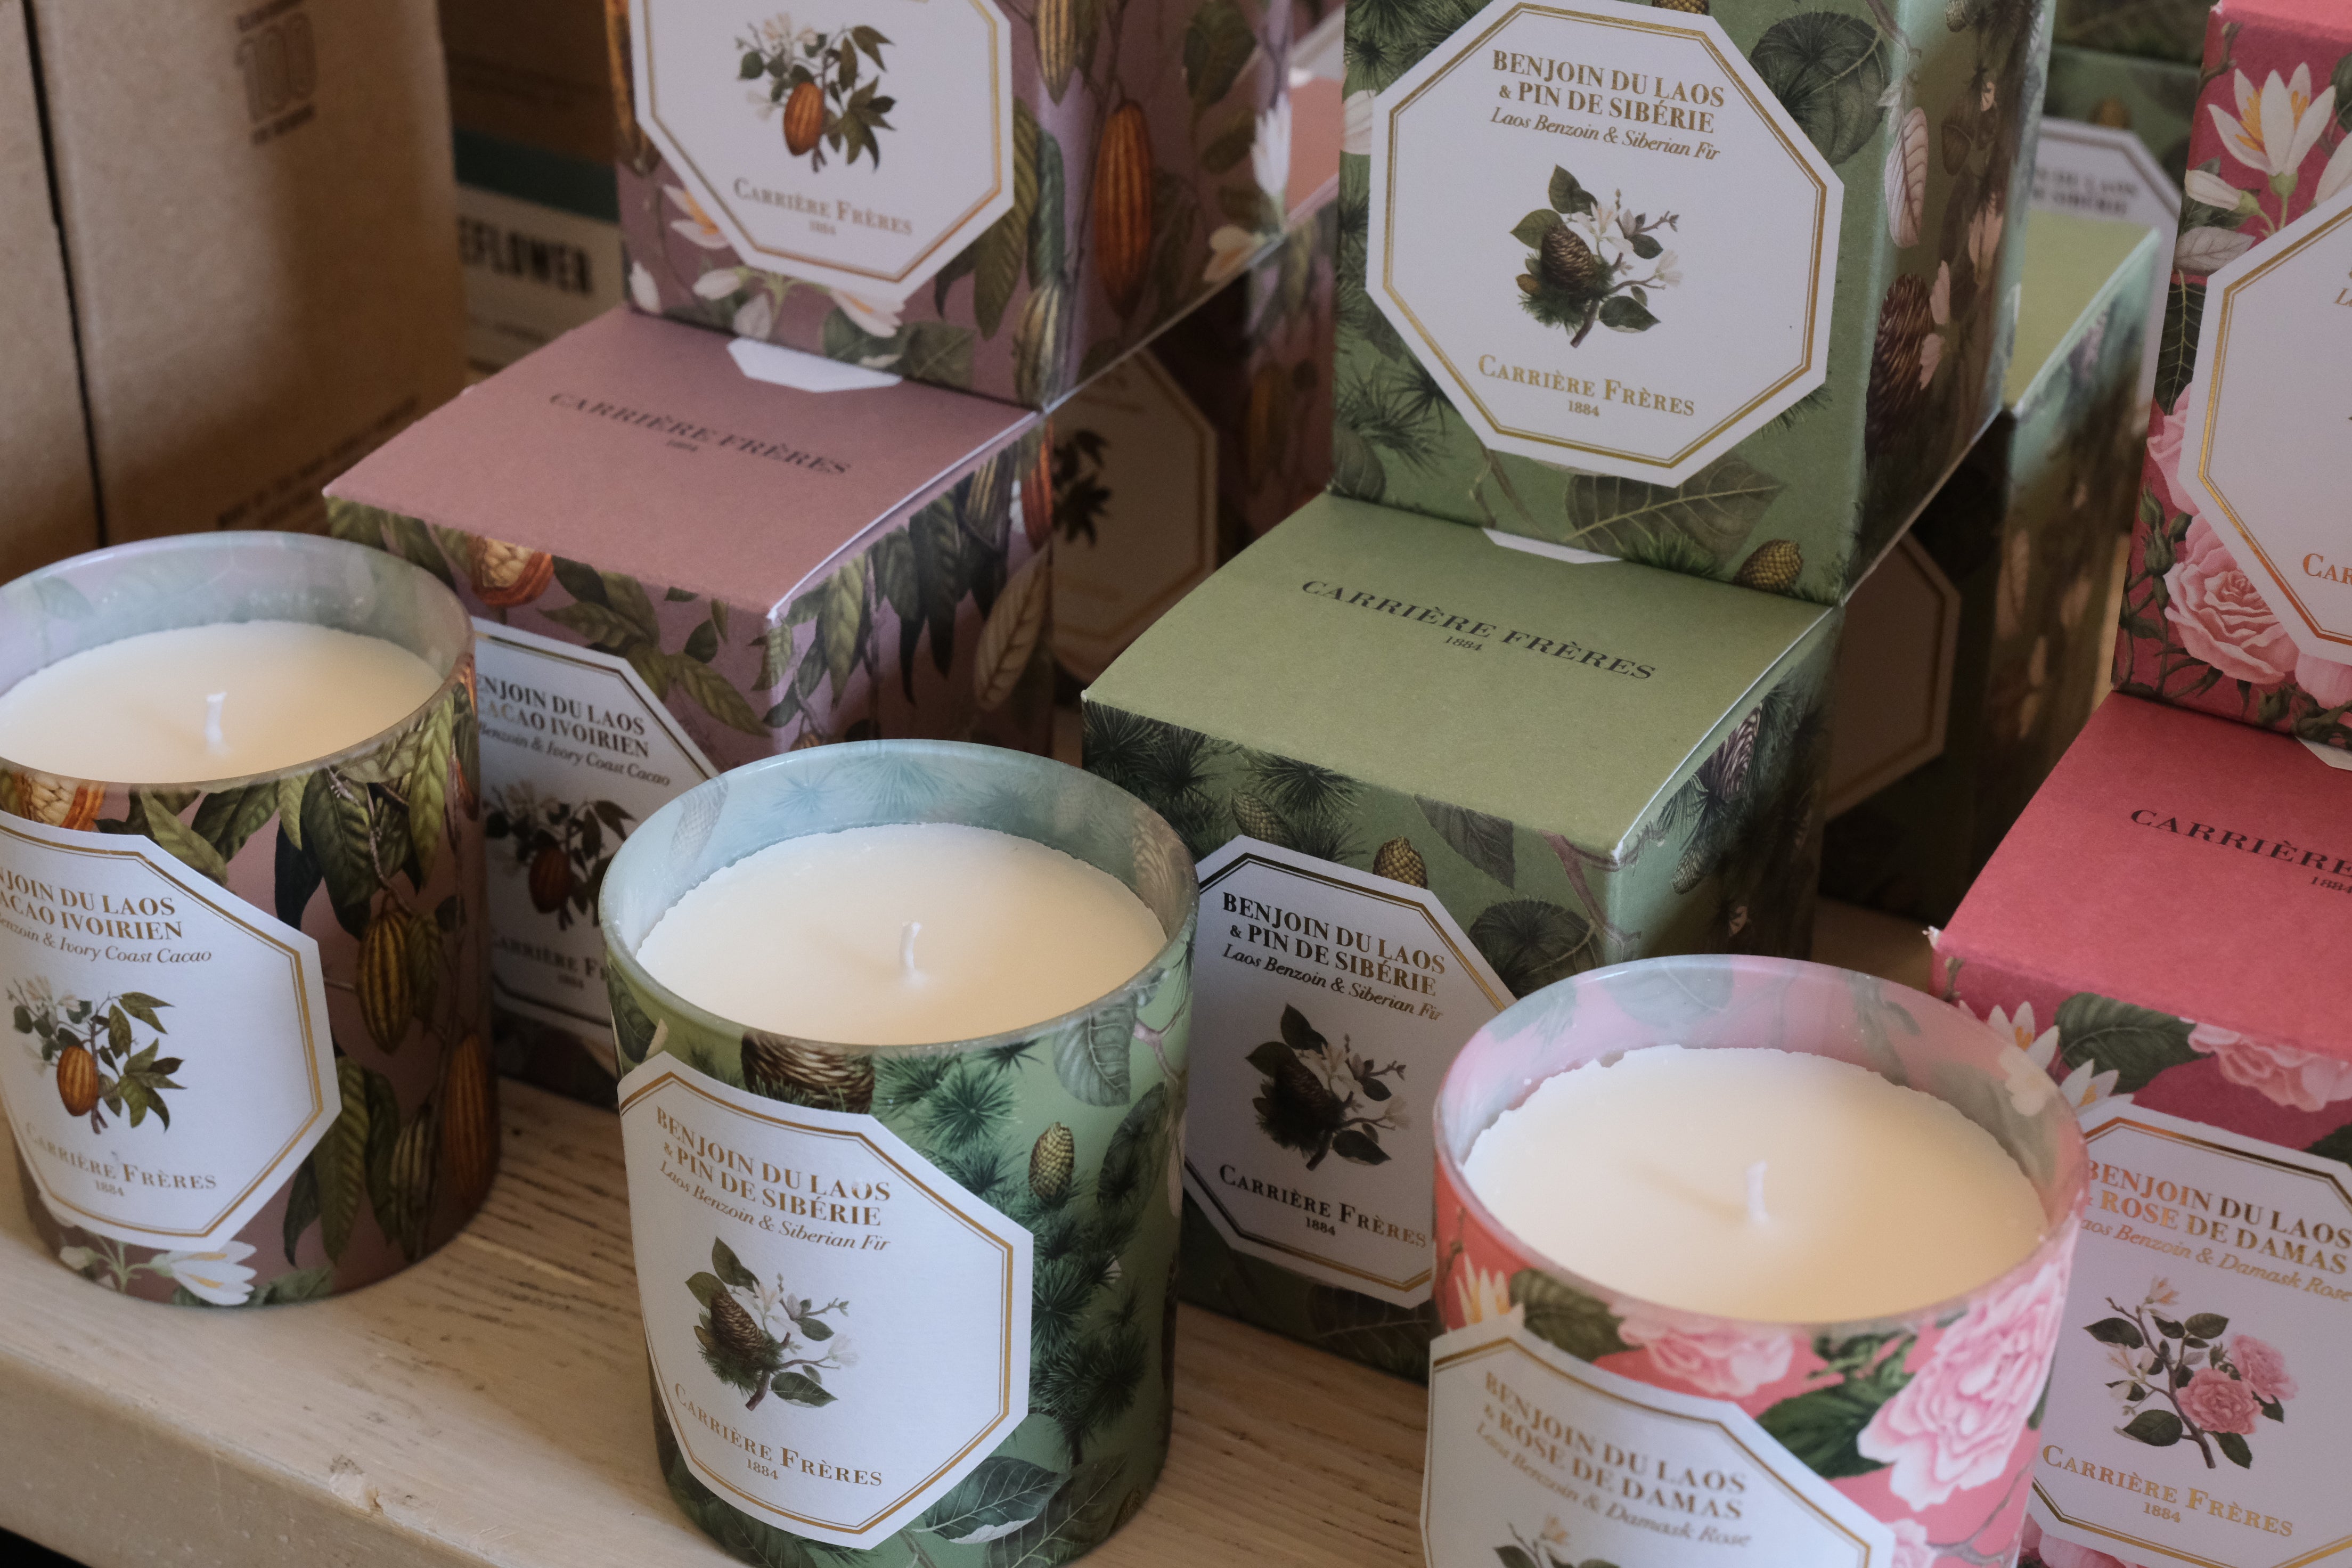 New Holiday Candle Sets From Carrière Frères